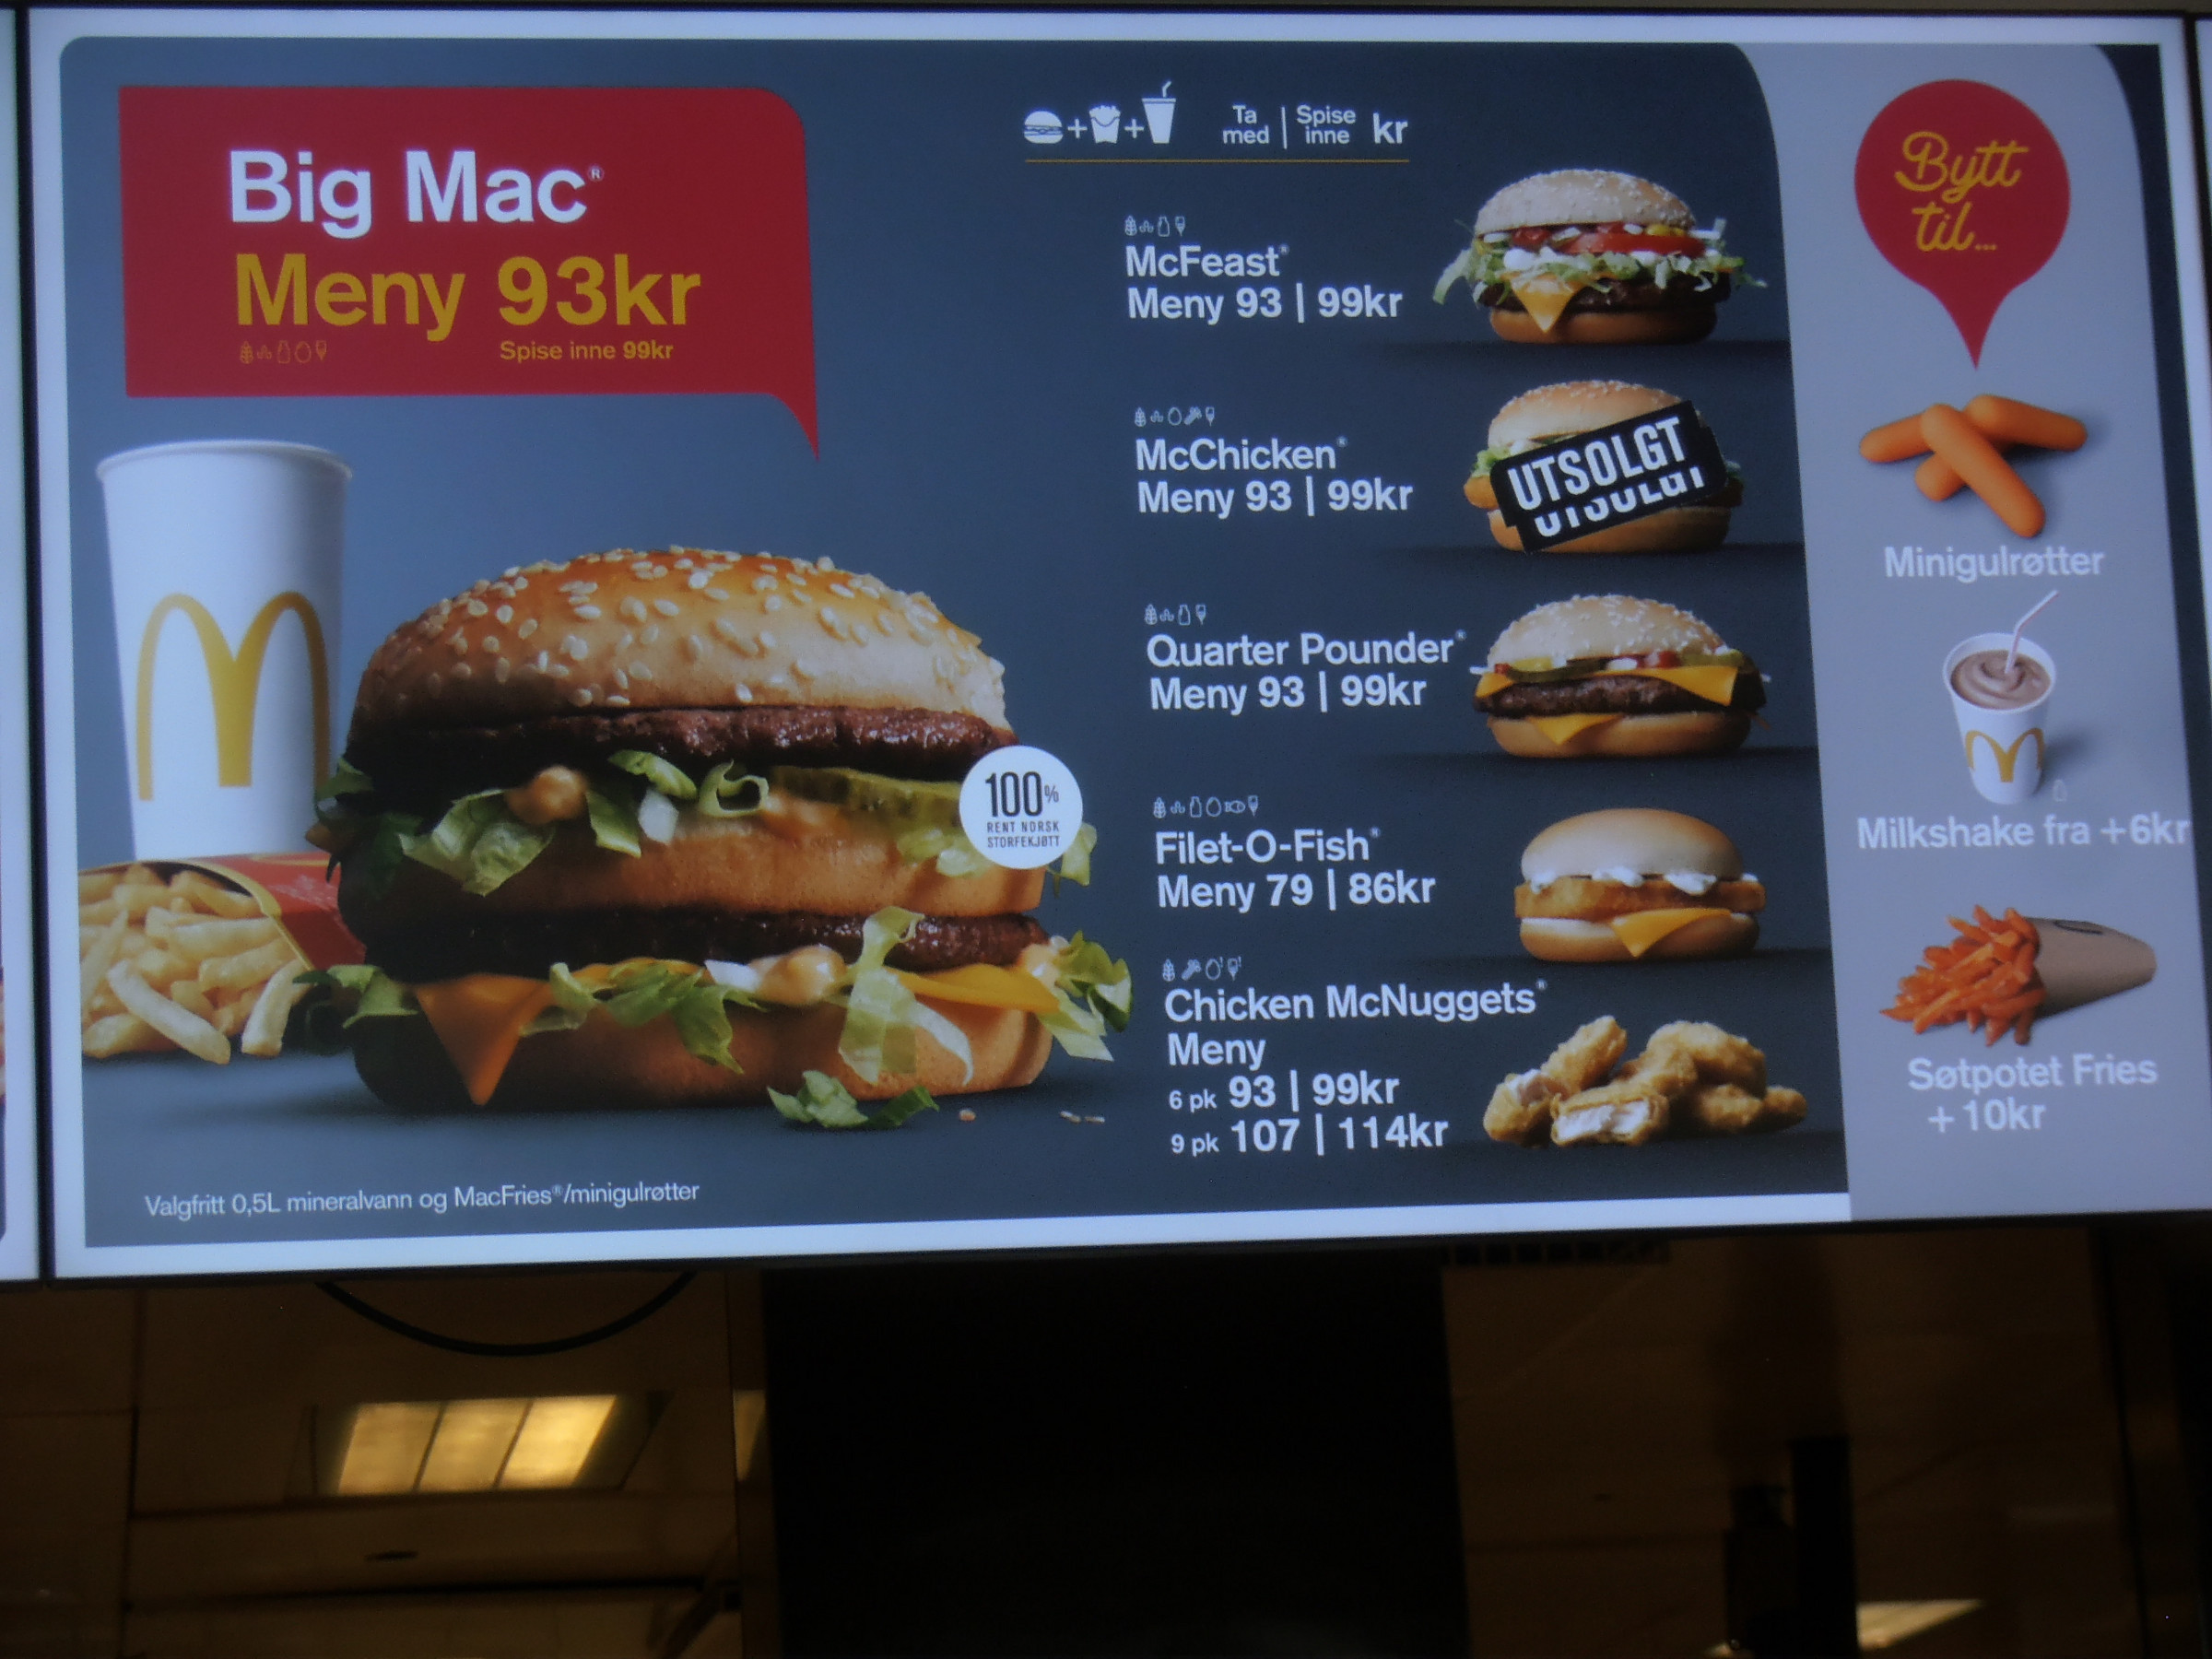 The price of a Big Mac in Norway(11.69), placing it neck and neck with